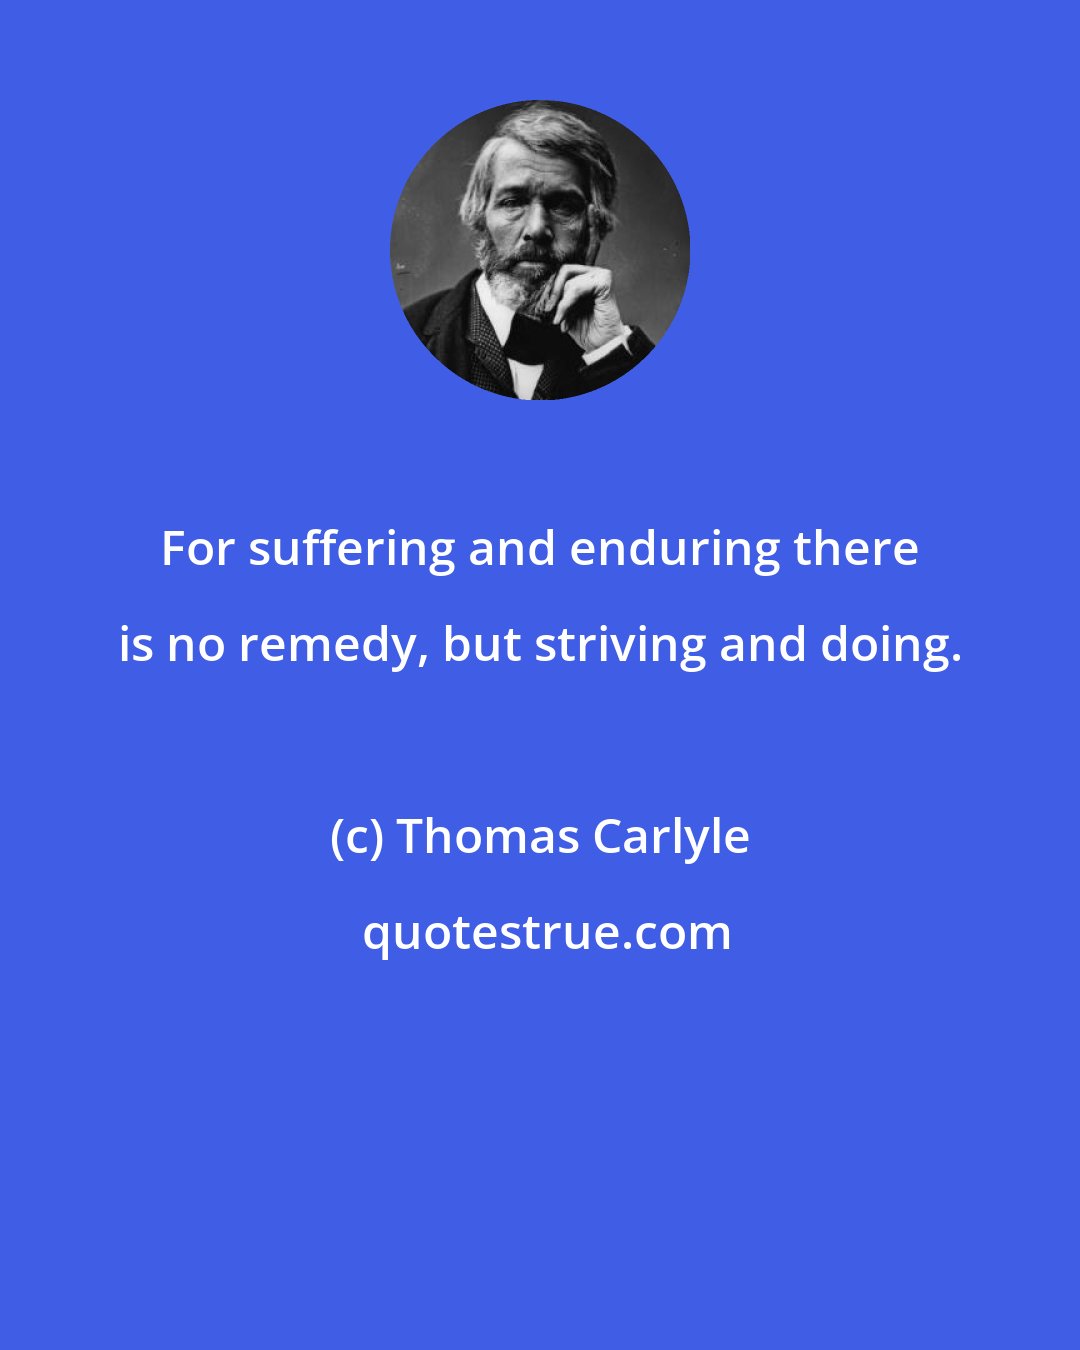 Thomas Carlyle: For suffering and enduring there is no remedy, but striving and doing.